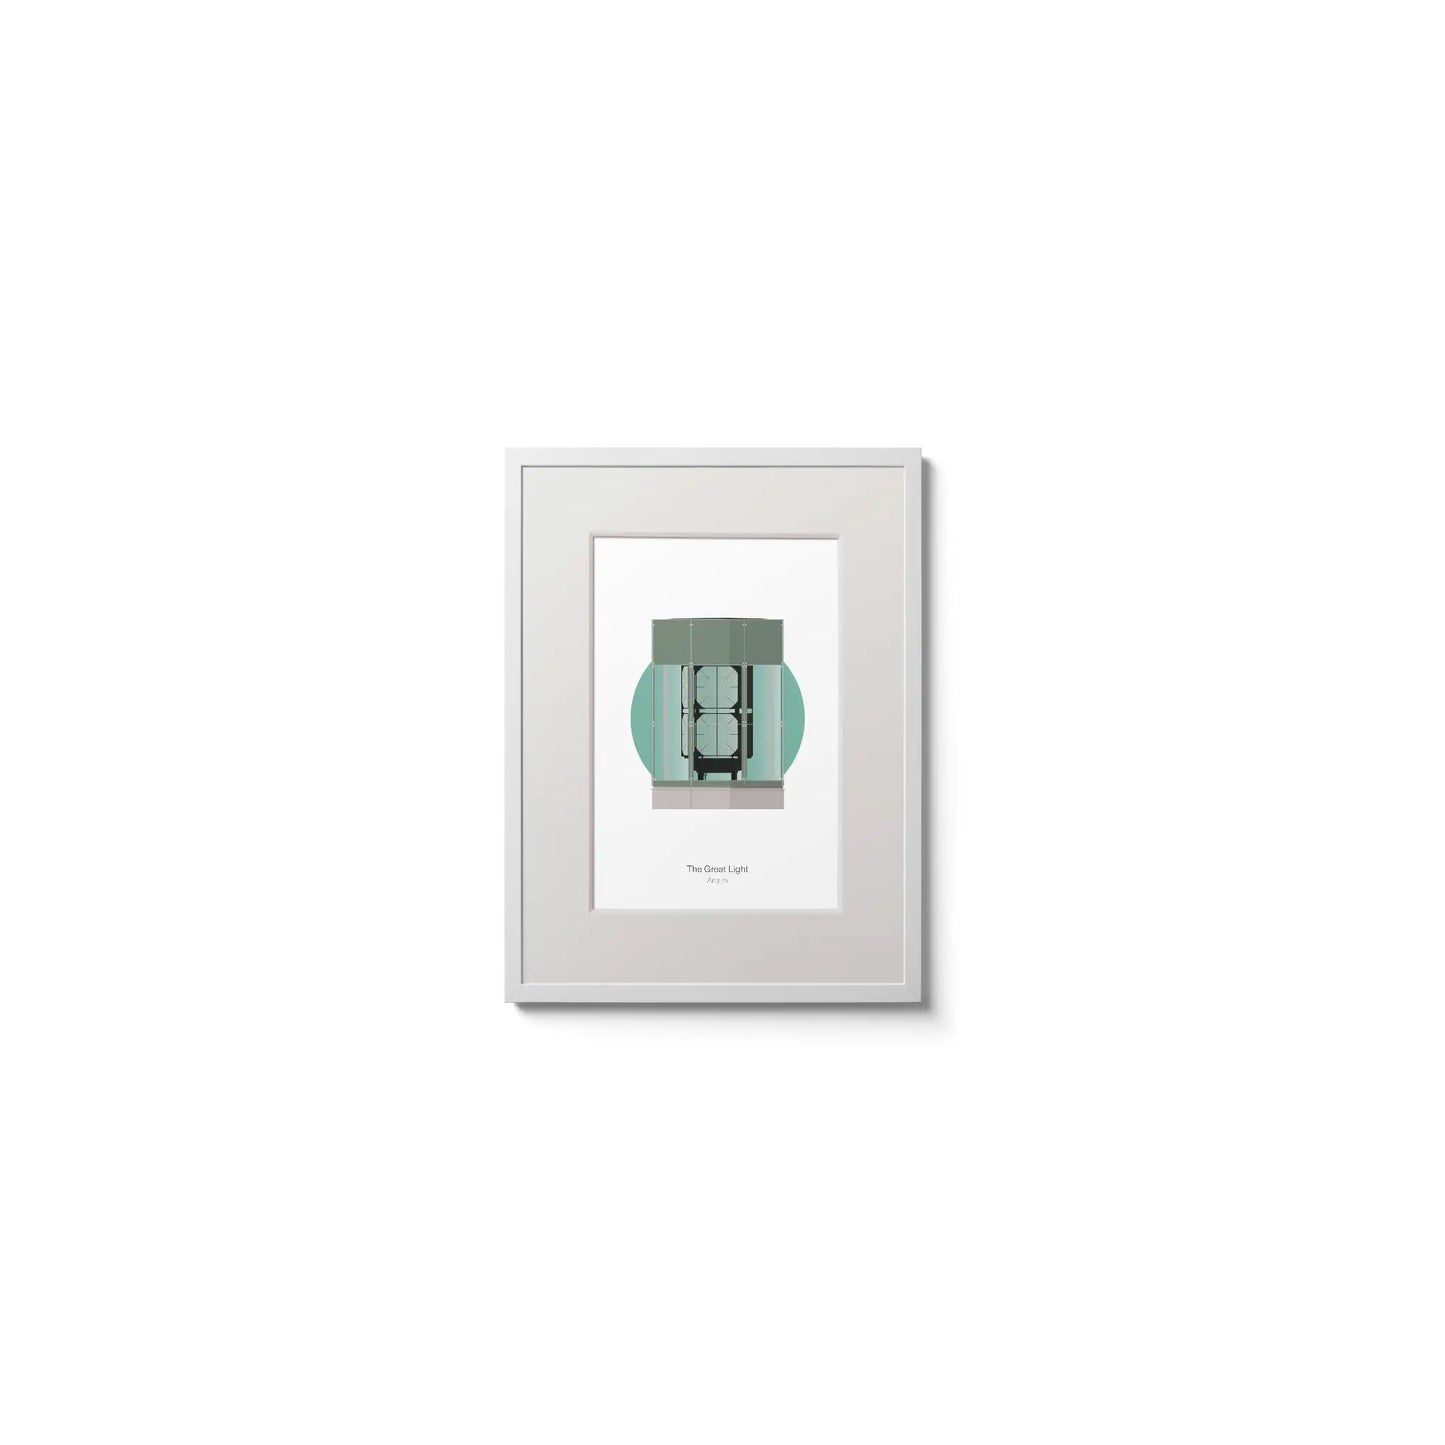 Contemporary wall hanging of The Great Light lighthouse on a white background inside light blue square,  in a white frame measuring 15x20cm.